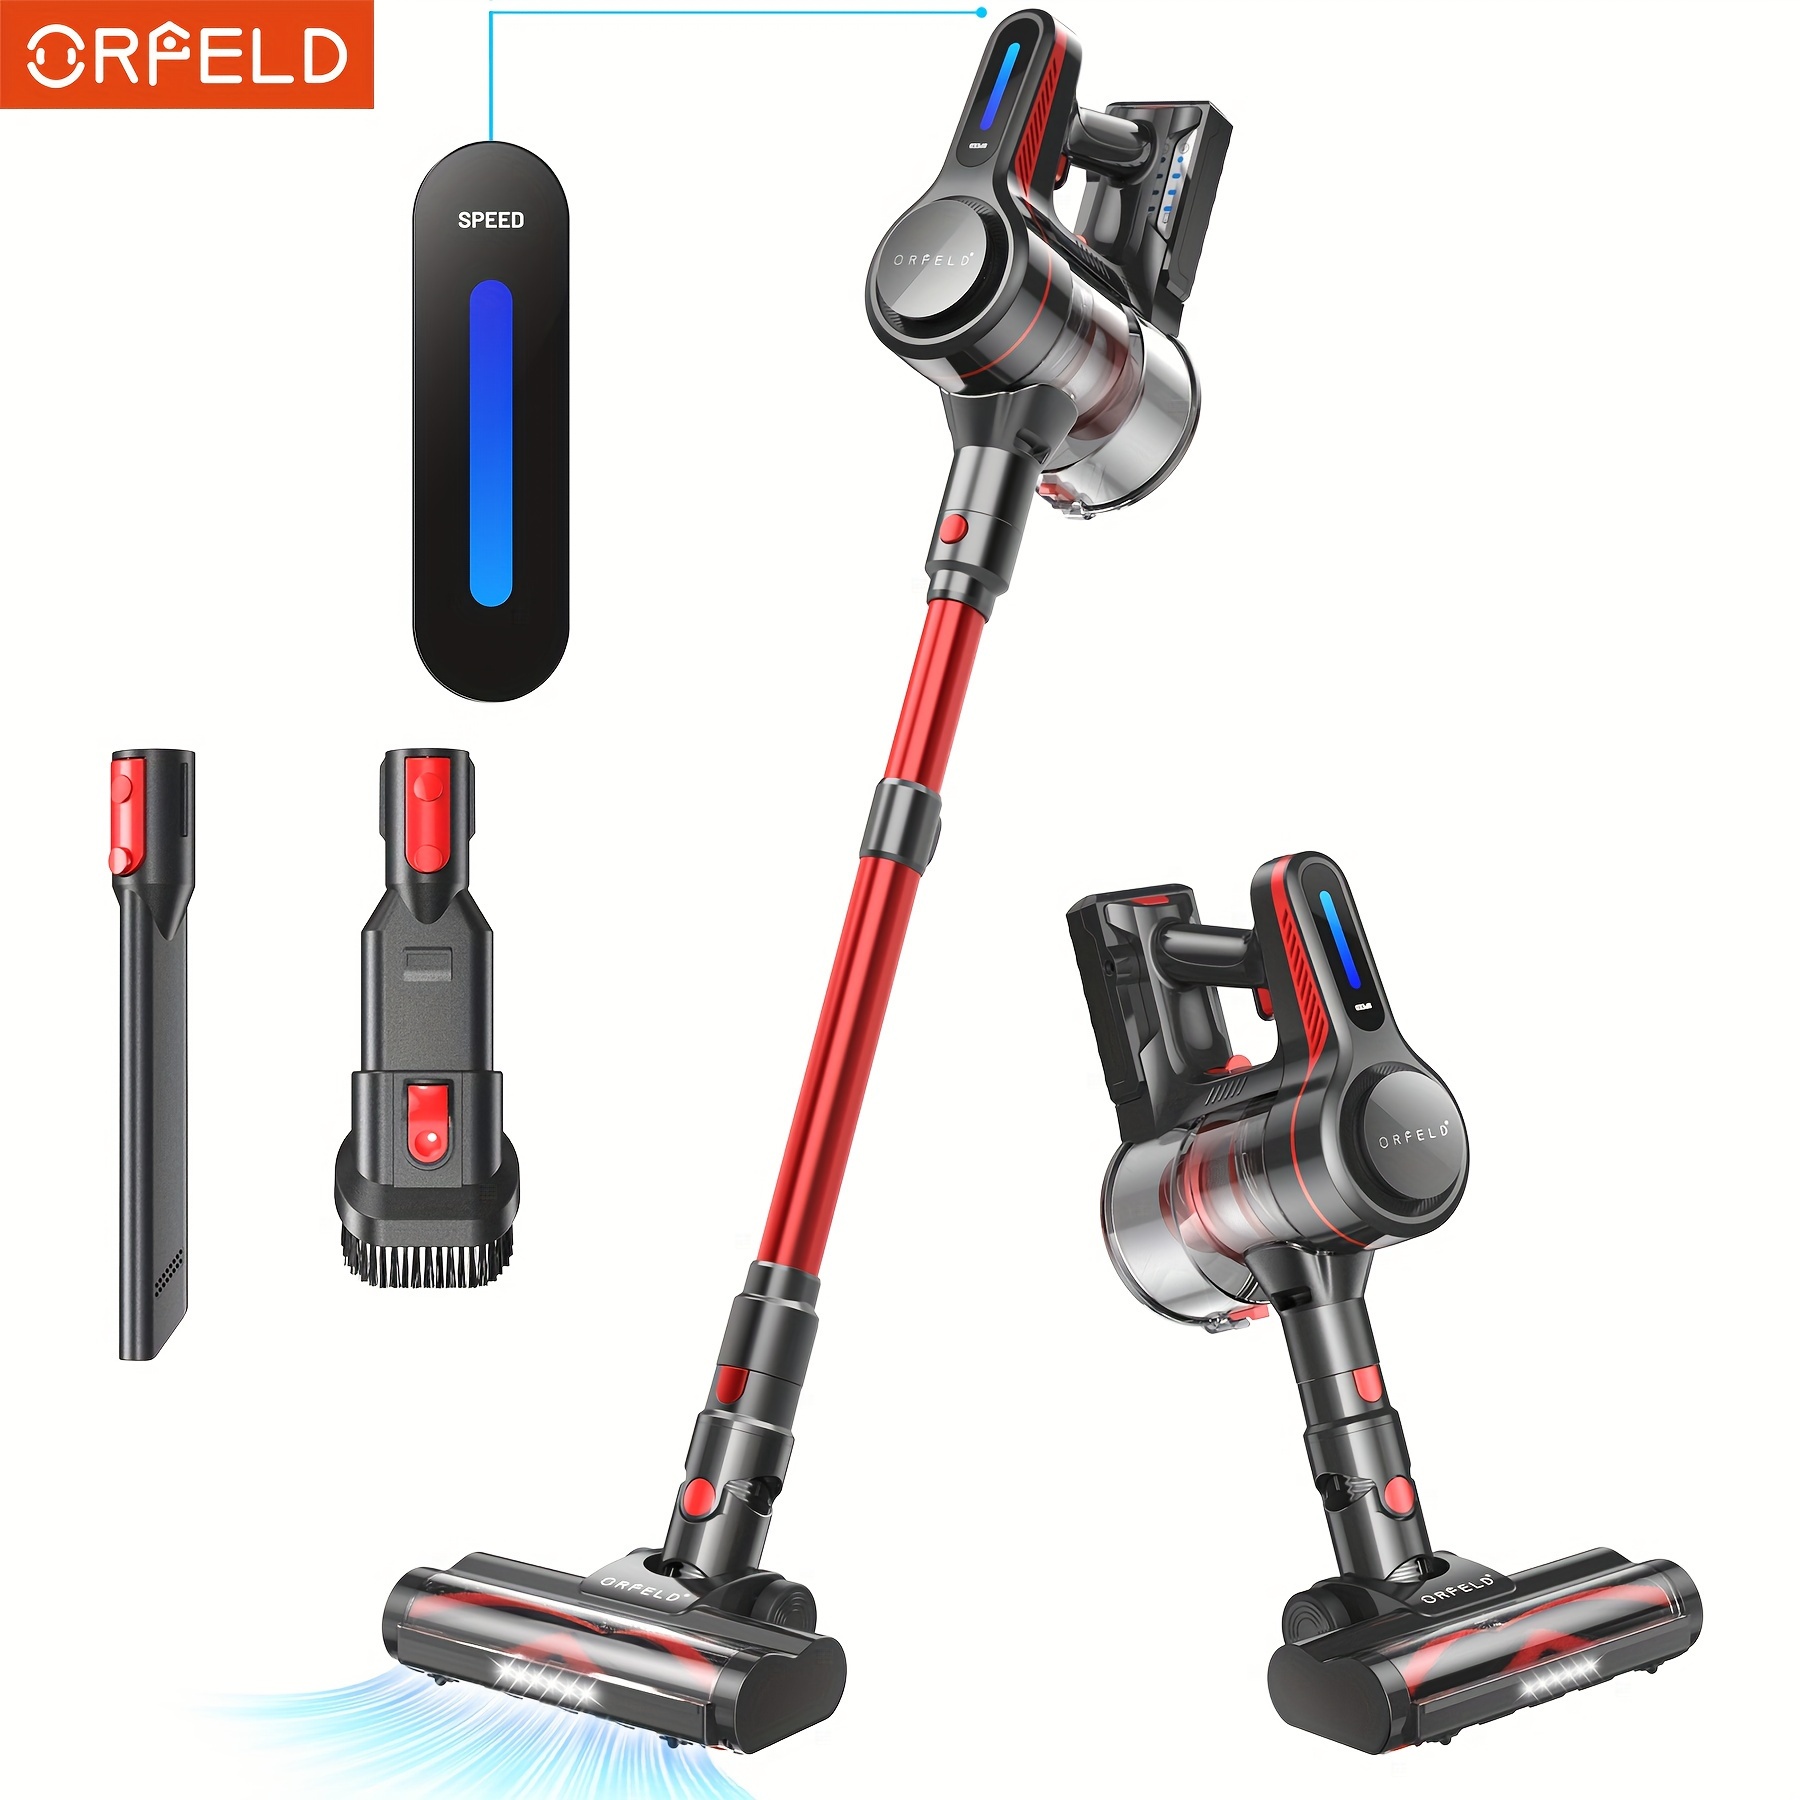 

Orfeld Cordless Vacuum Cleaner, Stick Vacuum With 26kpa Powerful Suction, 45mins Runtime , Anti-tangle And 1.5l Dust Cup, 6 In 1 Lightweight Vacuum For Hardwood Floor Carpet Pet Hair